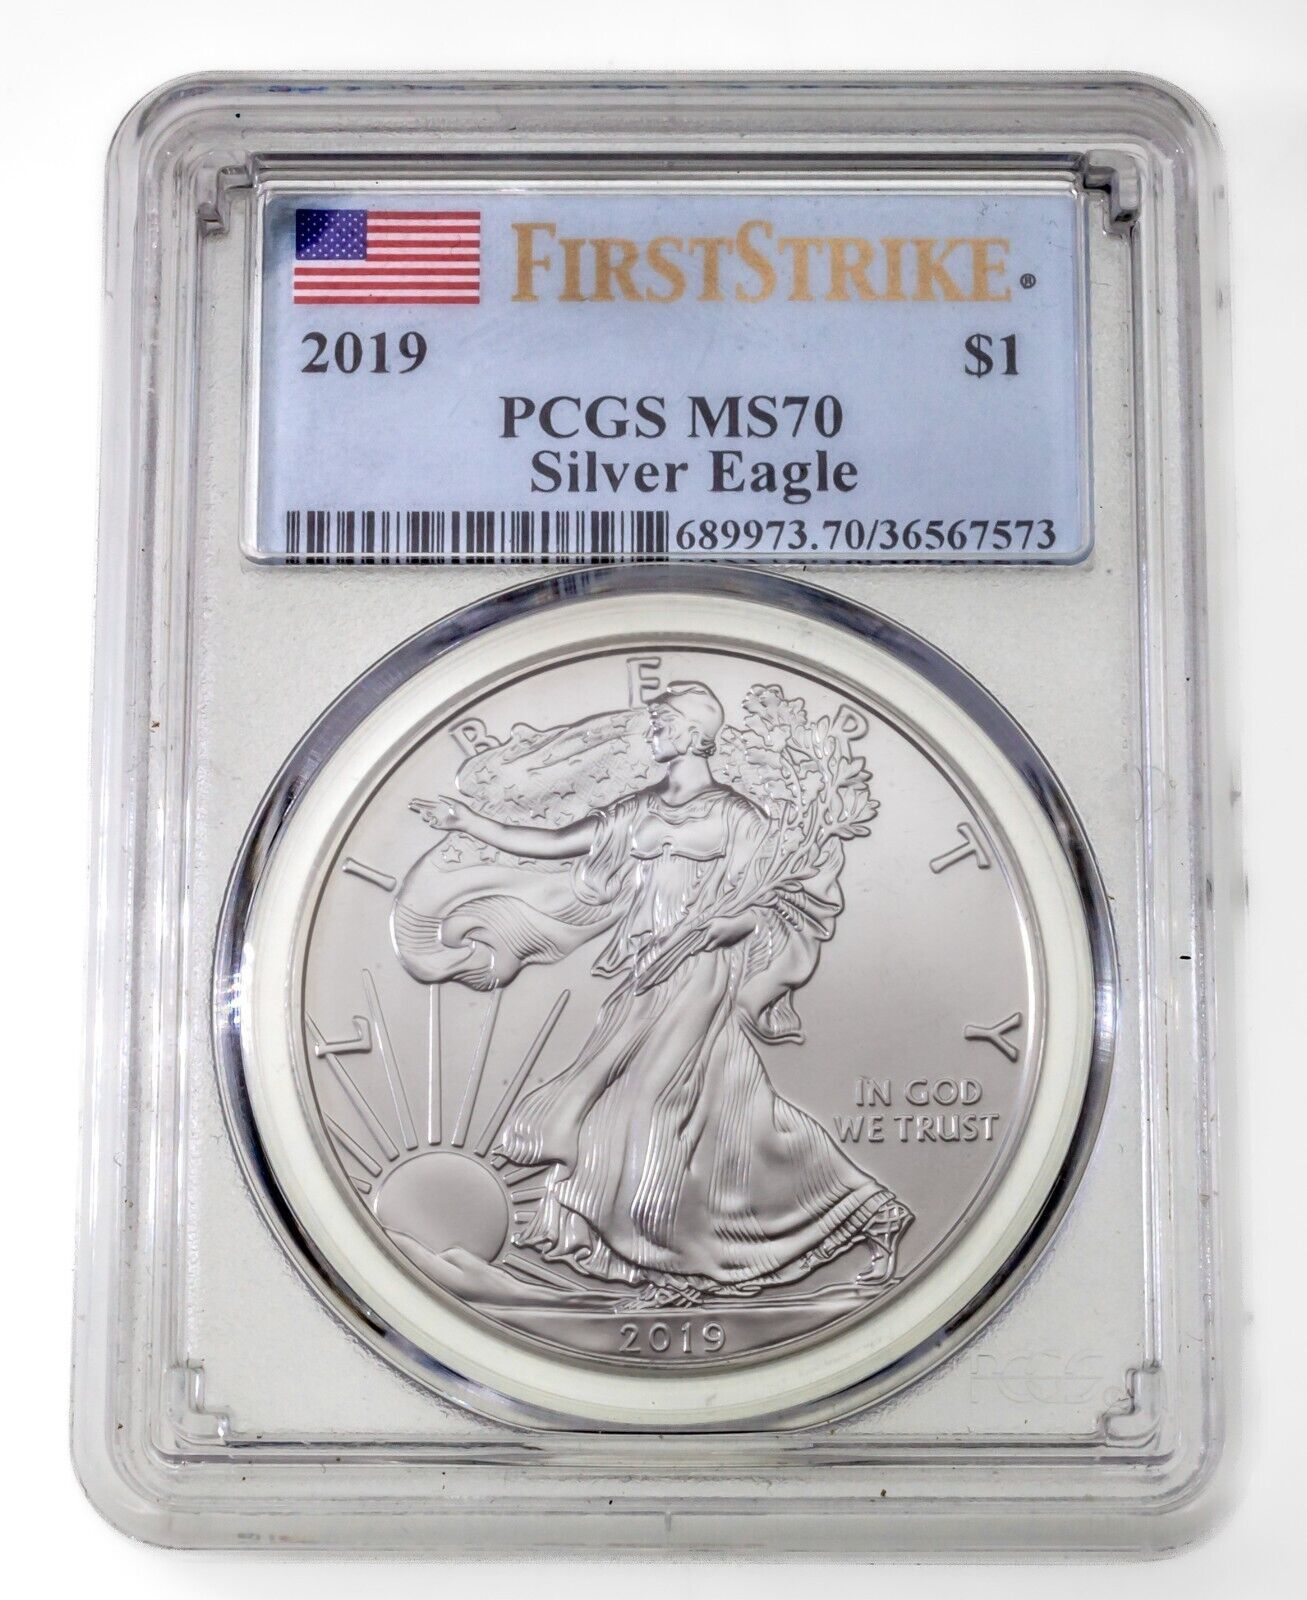 Primary image for 2019 $1 Silver American Eagle Graded by PCGS as MS70 First Strike